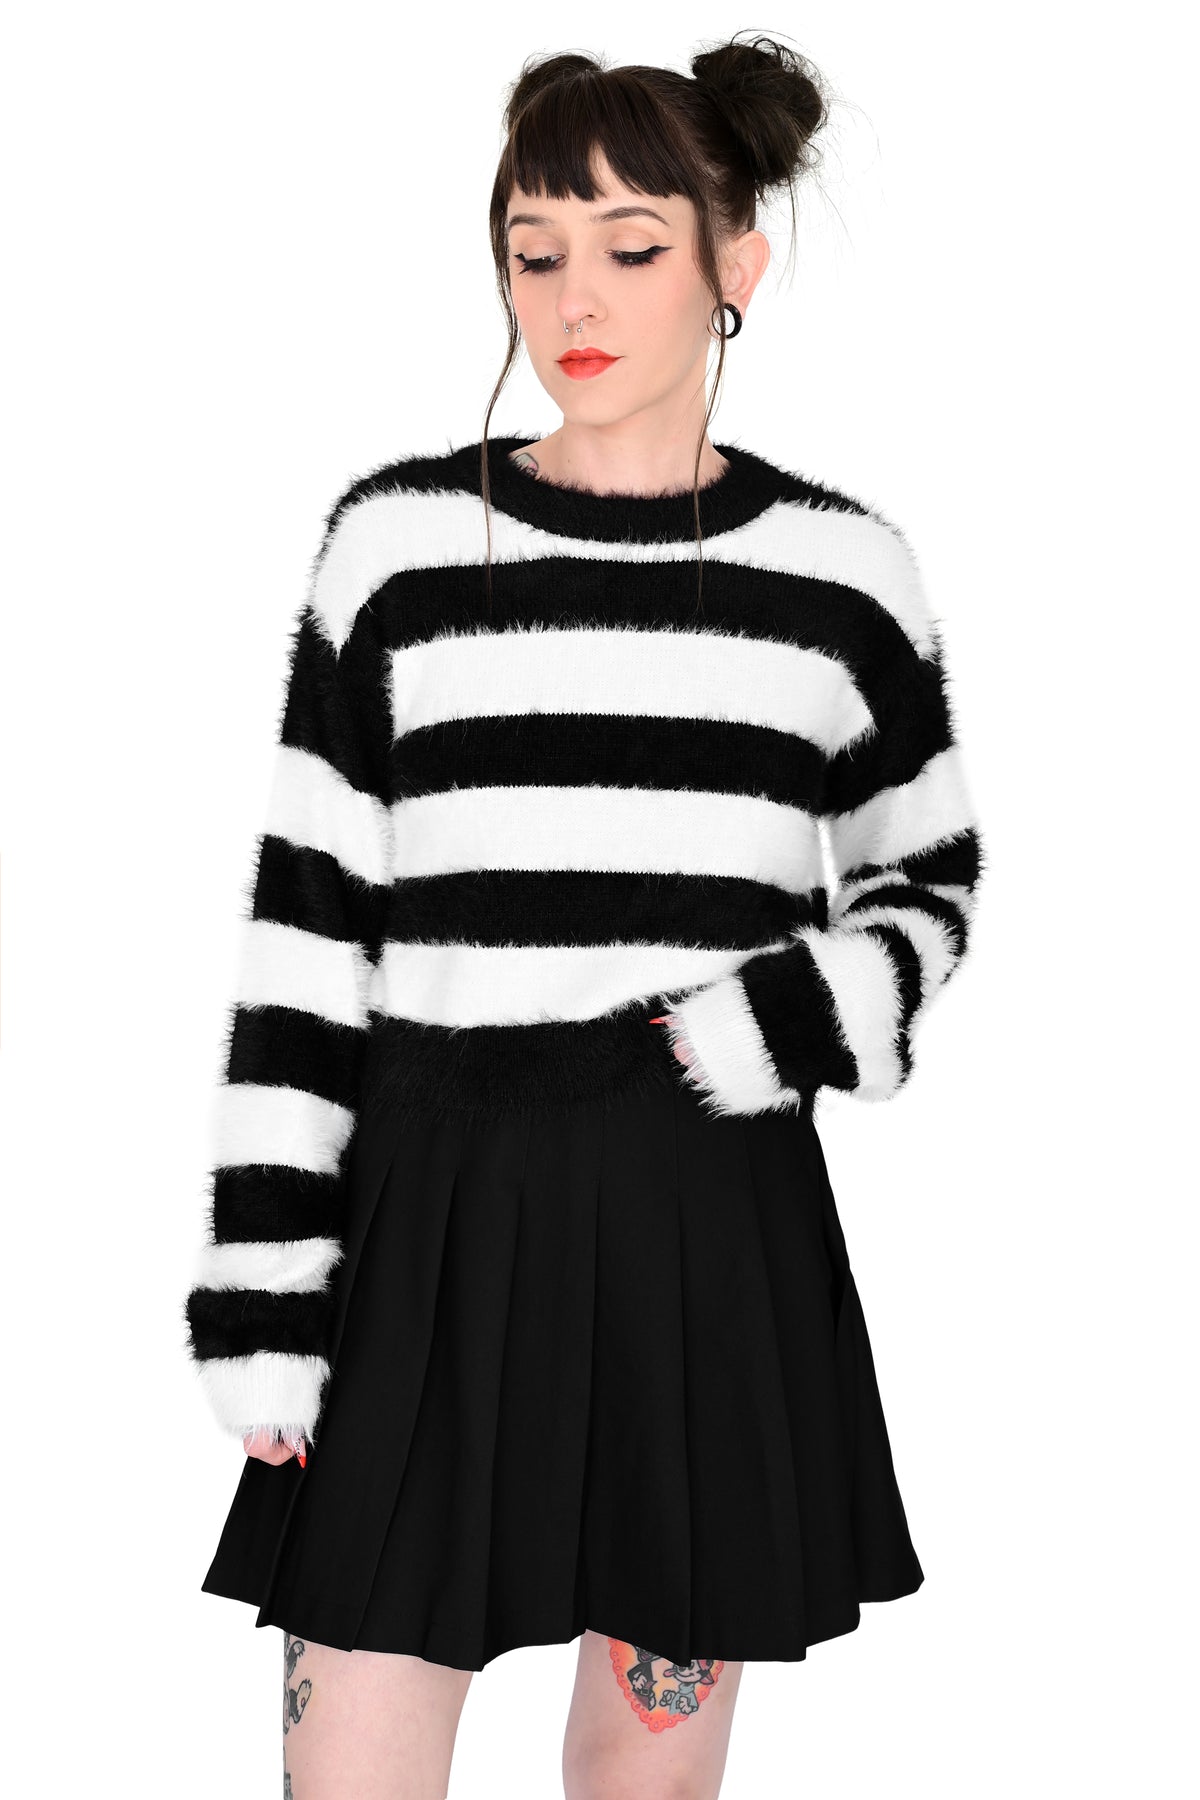 fuzzy black and white striped crop sweater